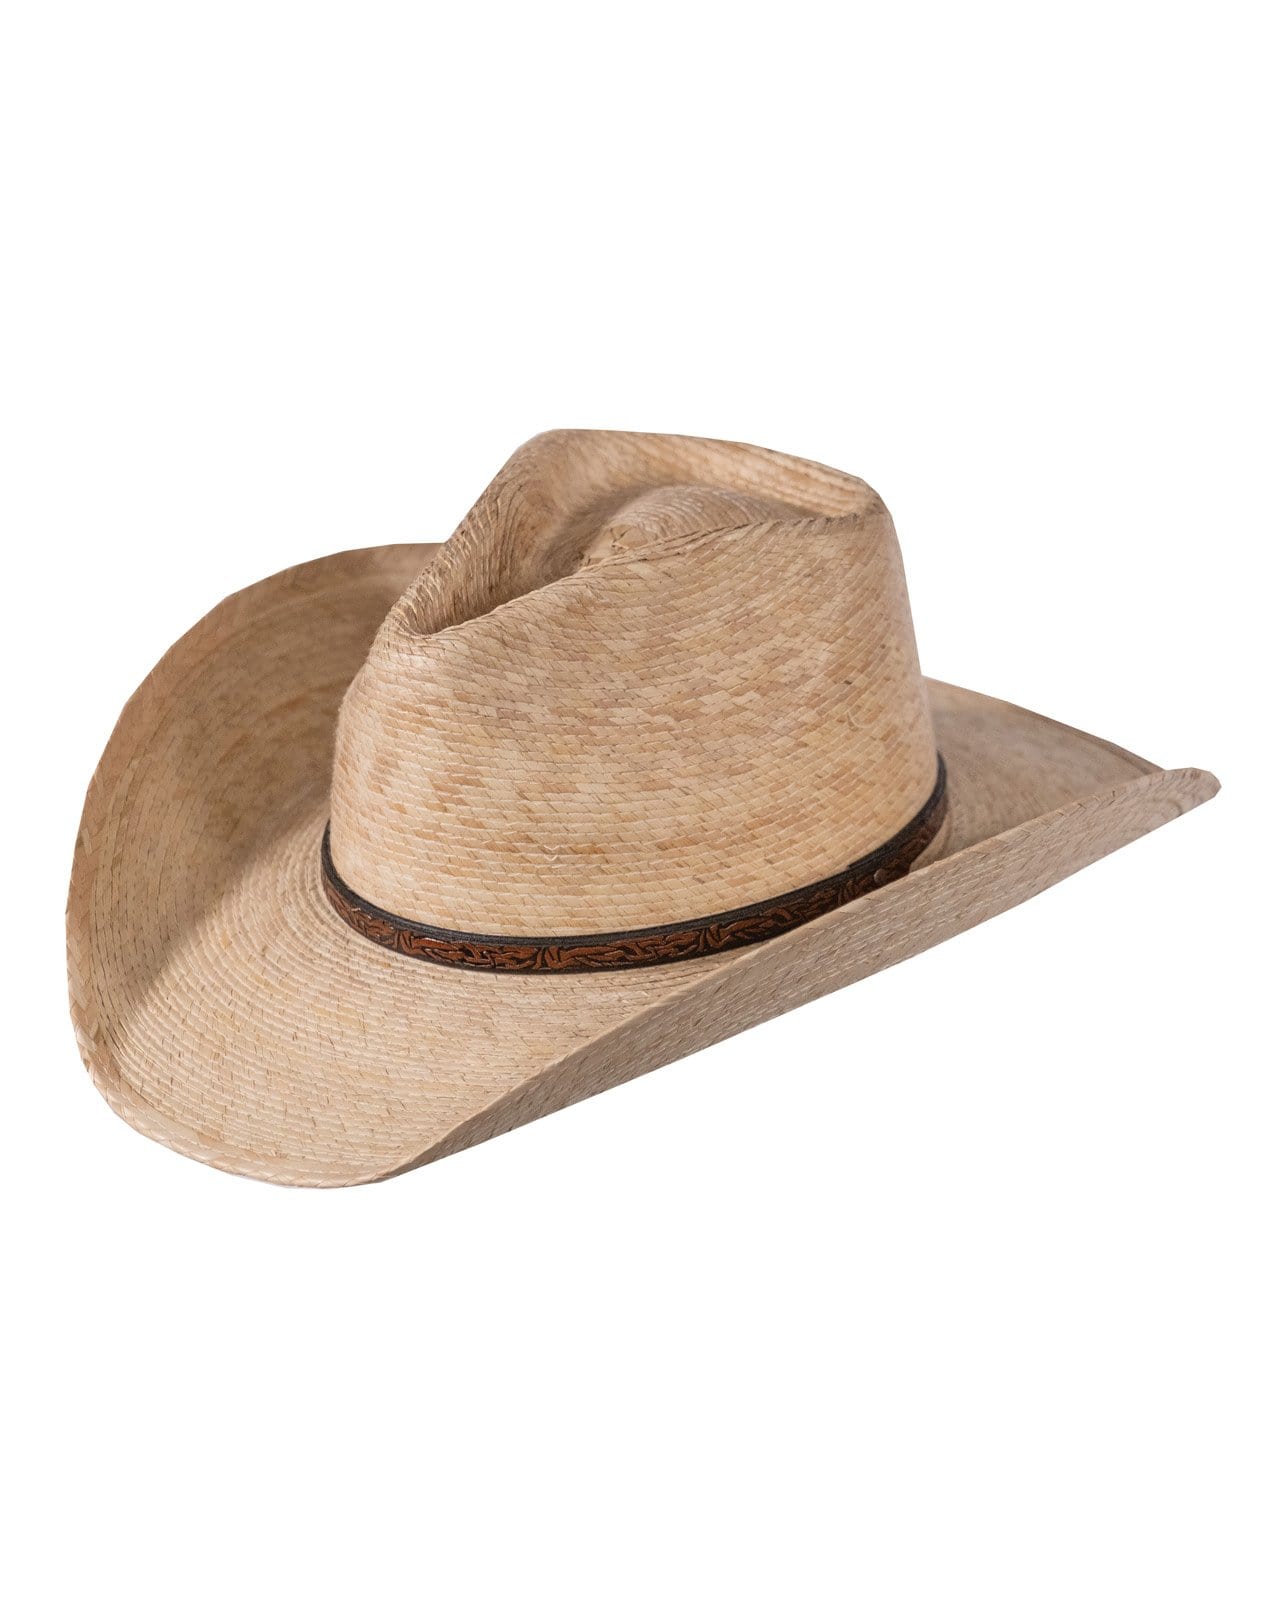 Rio  Hats by Outback Trading Company –